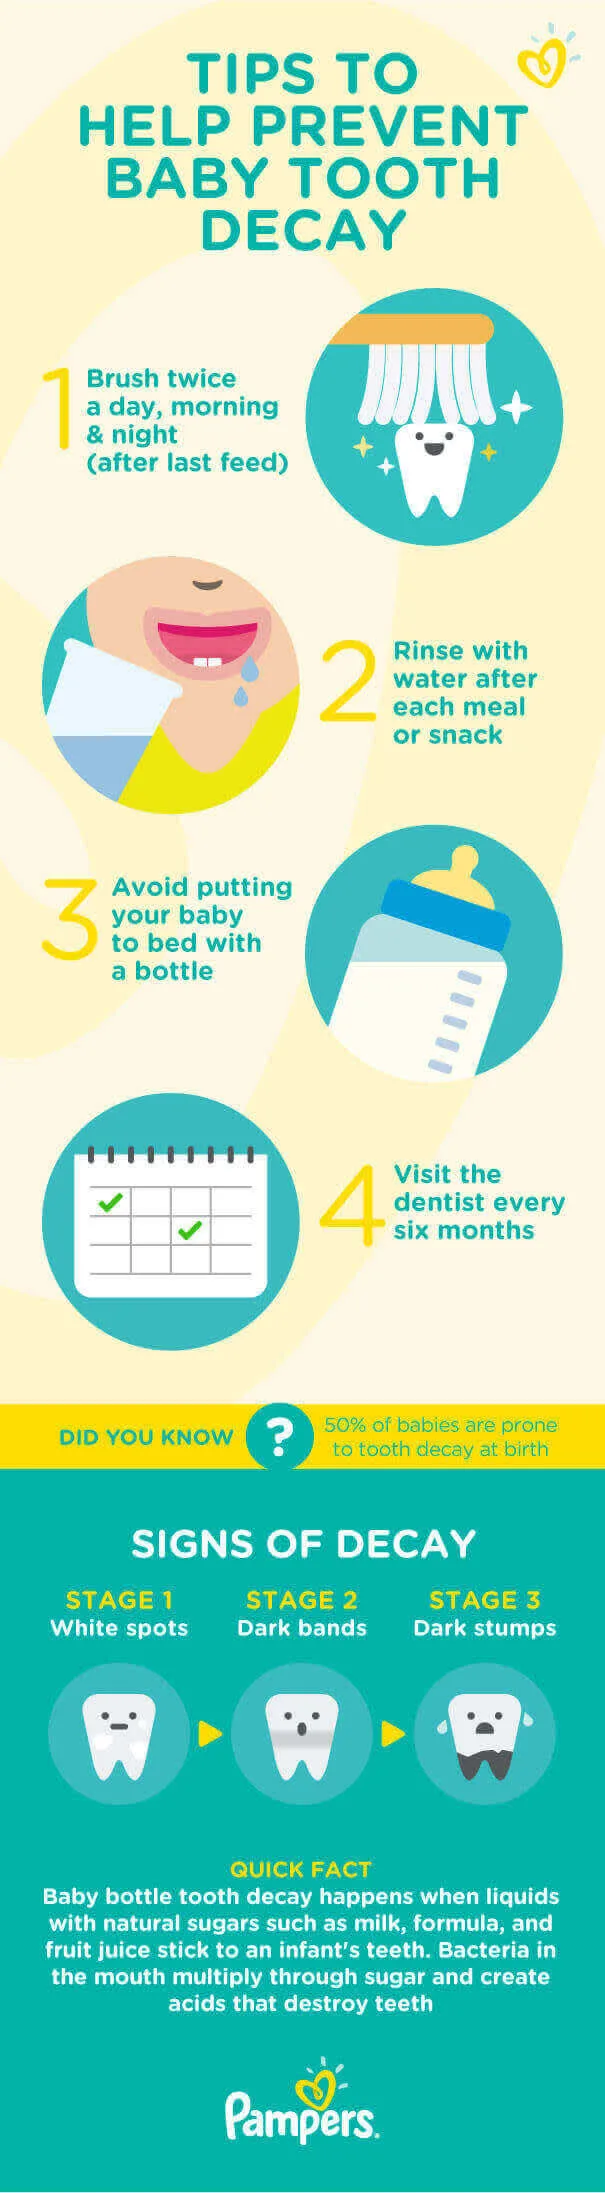 Tips to help prevent baby tooth decay